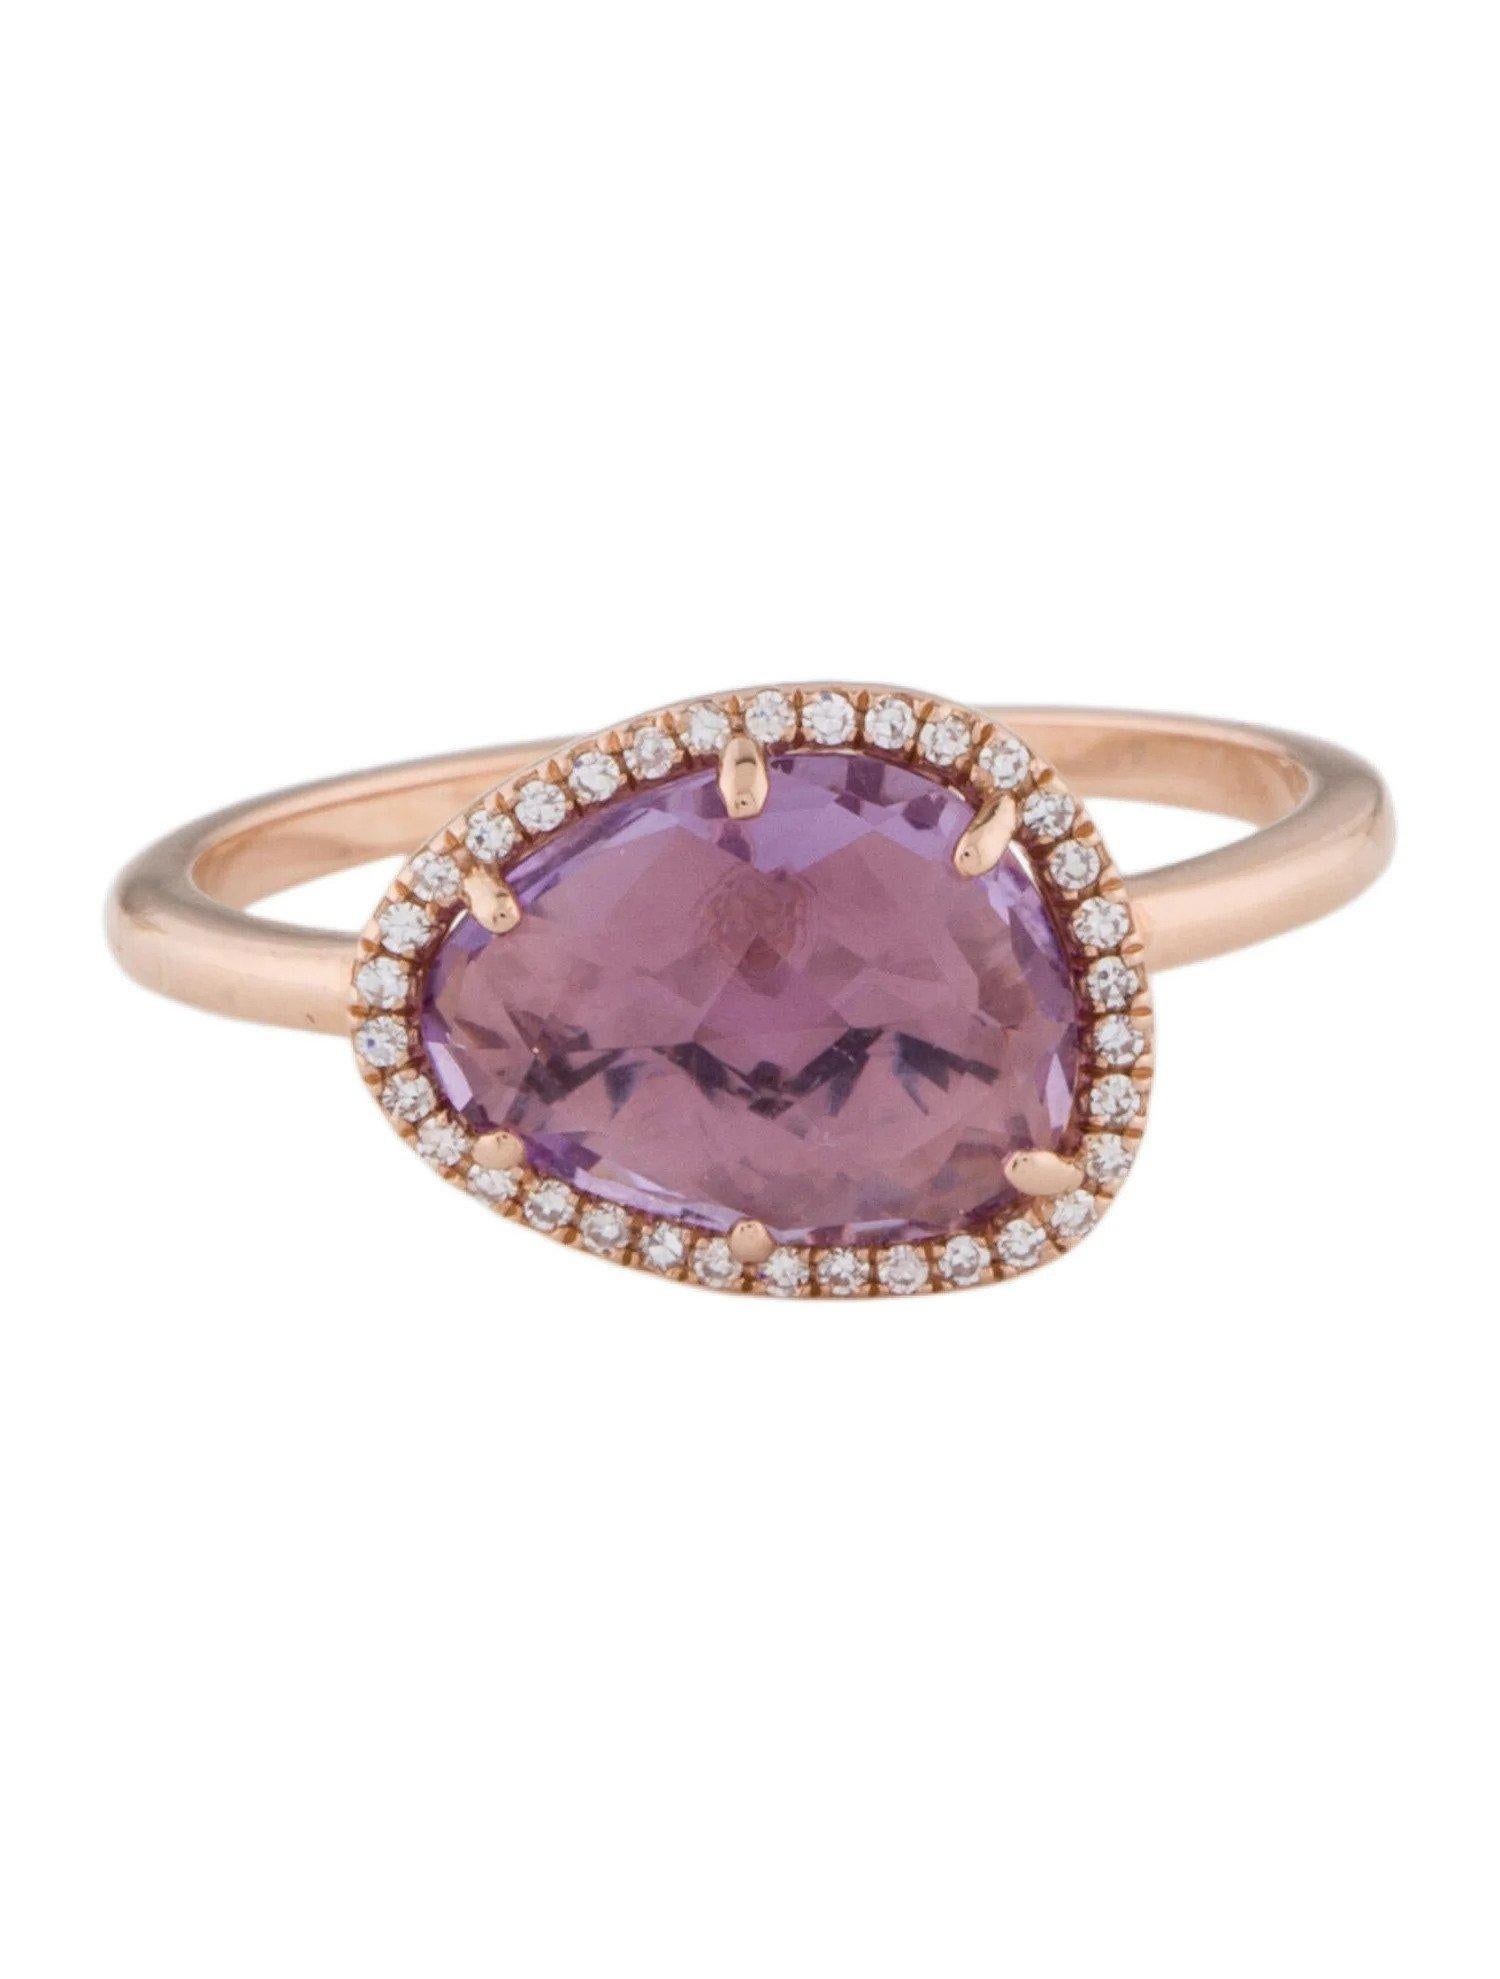 This Amethyst & Diamond Ring is a stunning and timeless accessory that can add a touch of glamour and sophistication to any outfit. 

This ring features a 1.97 Carat Mixed Cut Pink Amethyst (12 x 9 MM), with a Diamond Halo comprised of 0.08 Carats